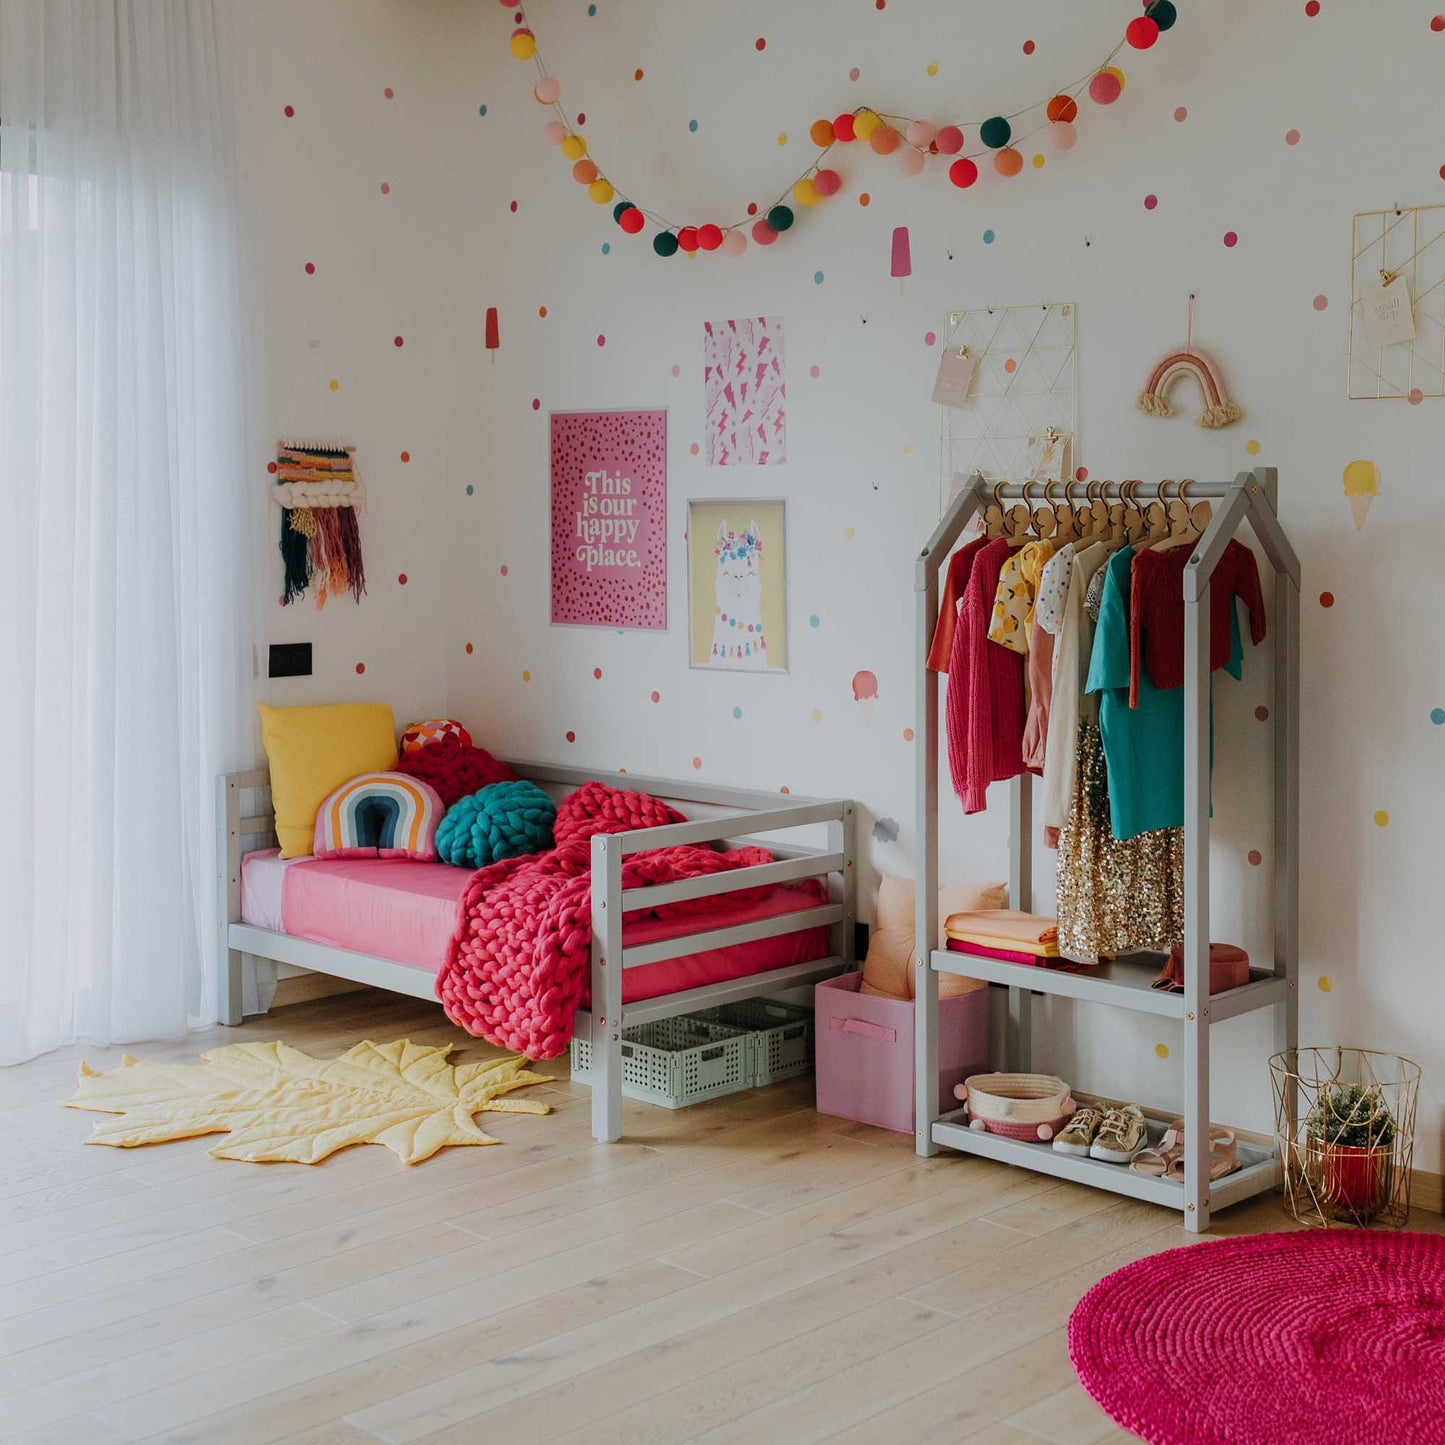 A girl's room with a colorful polka dot theme and a Sweet Home From Wood 2-in-1 transformable kids' bed with a 3-sided horizontal rail.